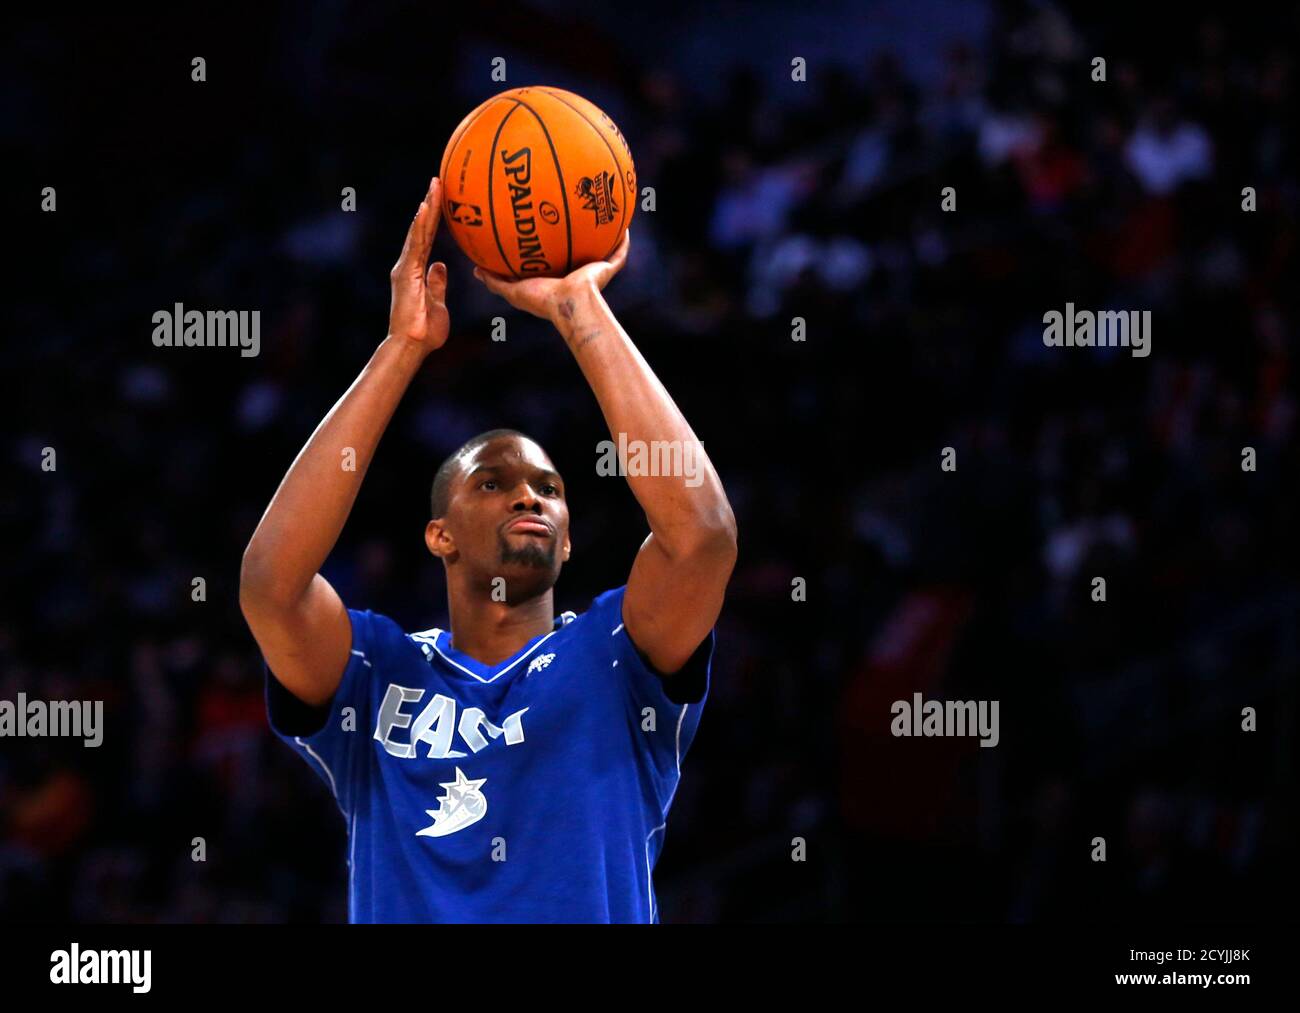 East All-Star Chris Bosh of the Miami Heat takes part in the All-Star  Shooting Stars competition during the NBA basketball All-Star weekend in  Houston, Texas, February 16, 2013. REUTERS/Jeff Haynes (UNITED STATES -